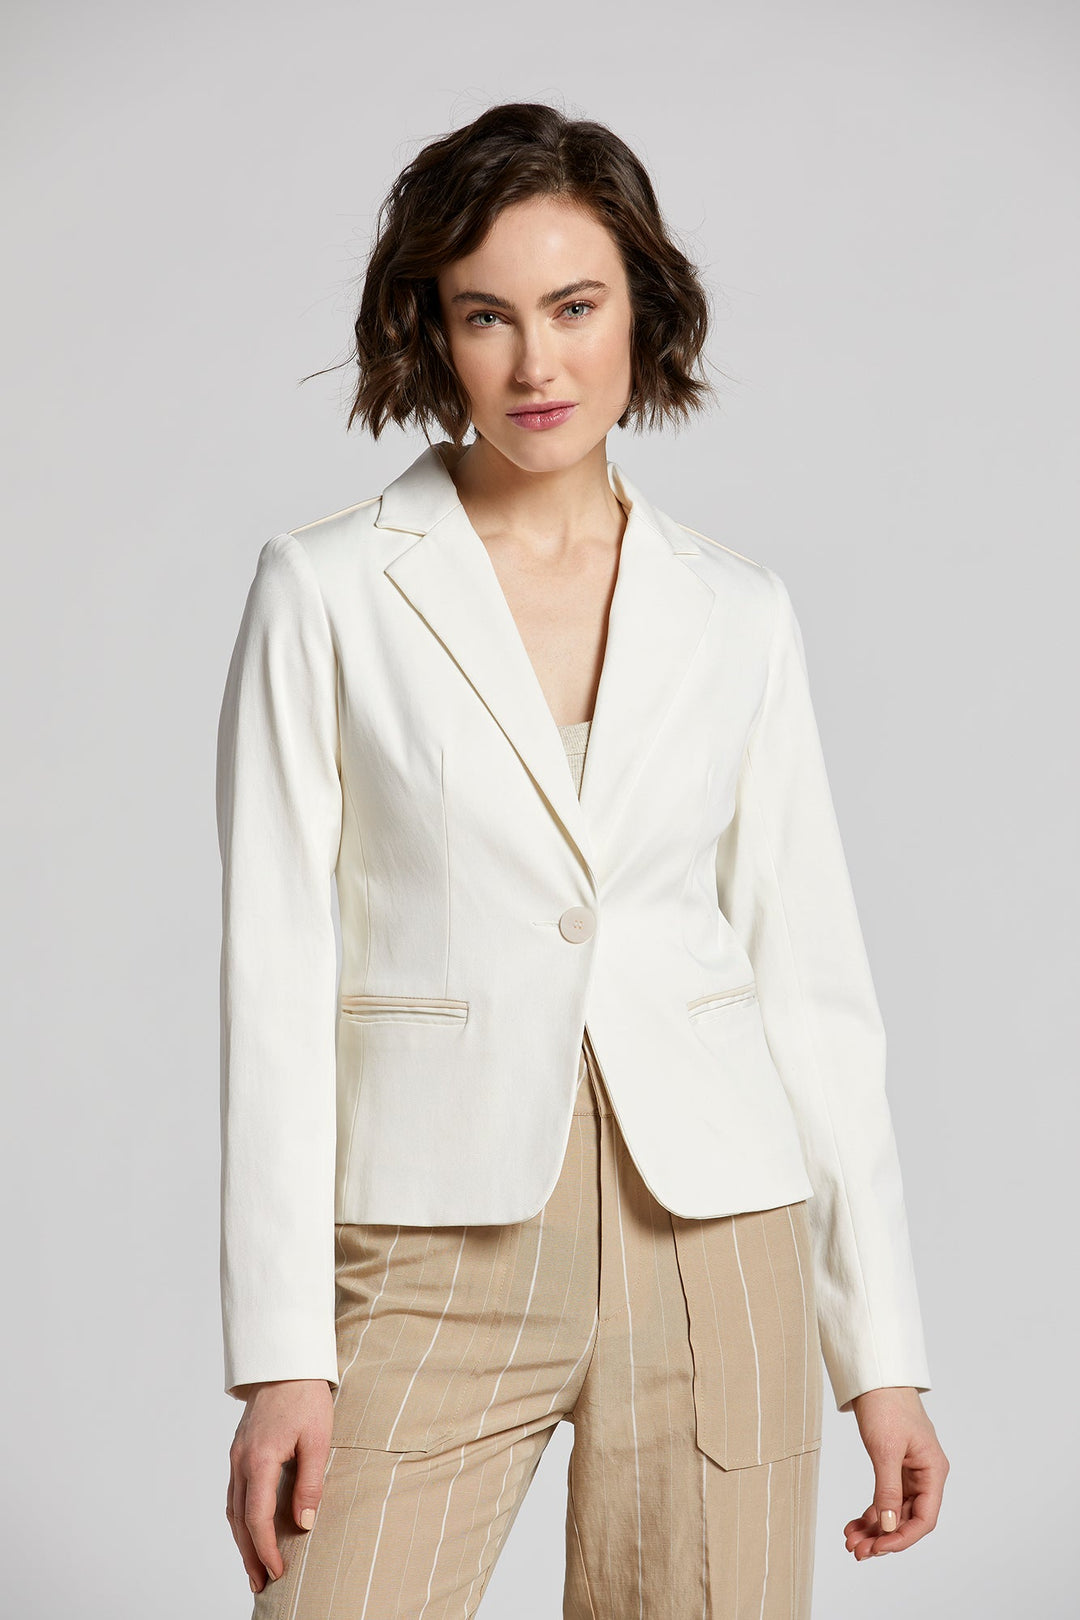 Noa Single Breasted Stretch Blazer With Piping - White/Beige